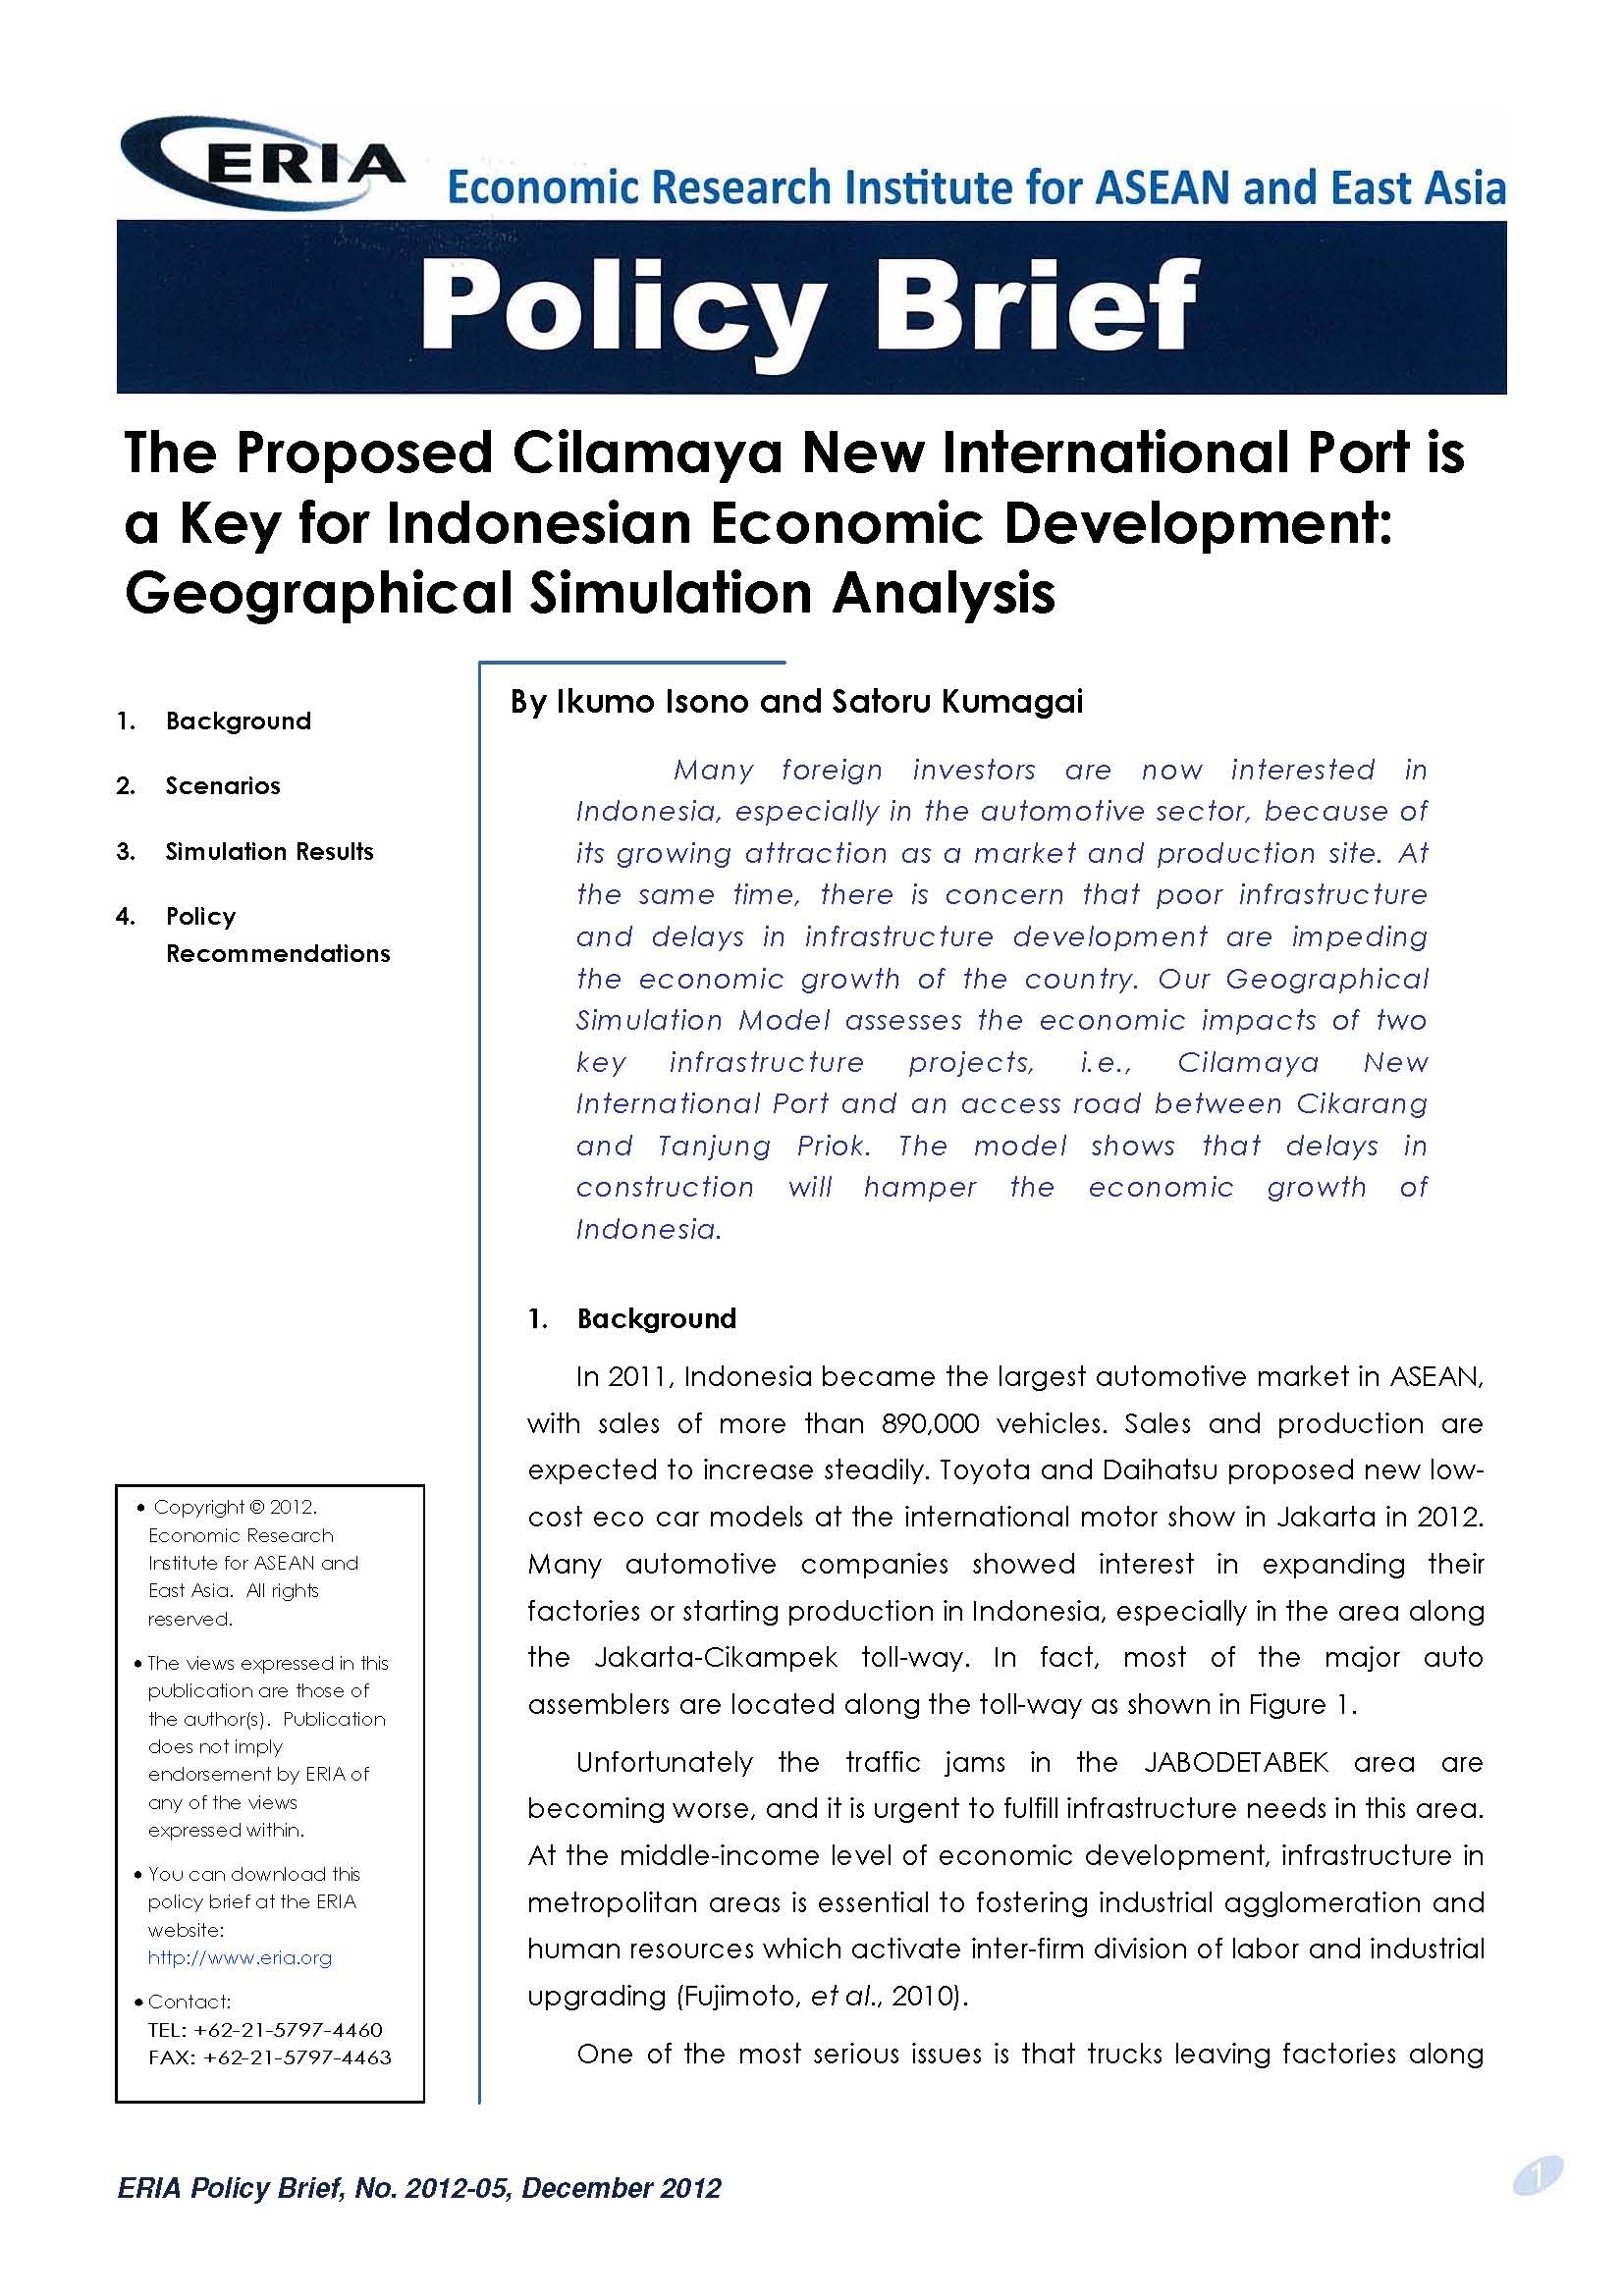 The Proposed Cilamaya New International Port is a Key for Indonesian Economic Development: Geographical Simulation Analysis